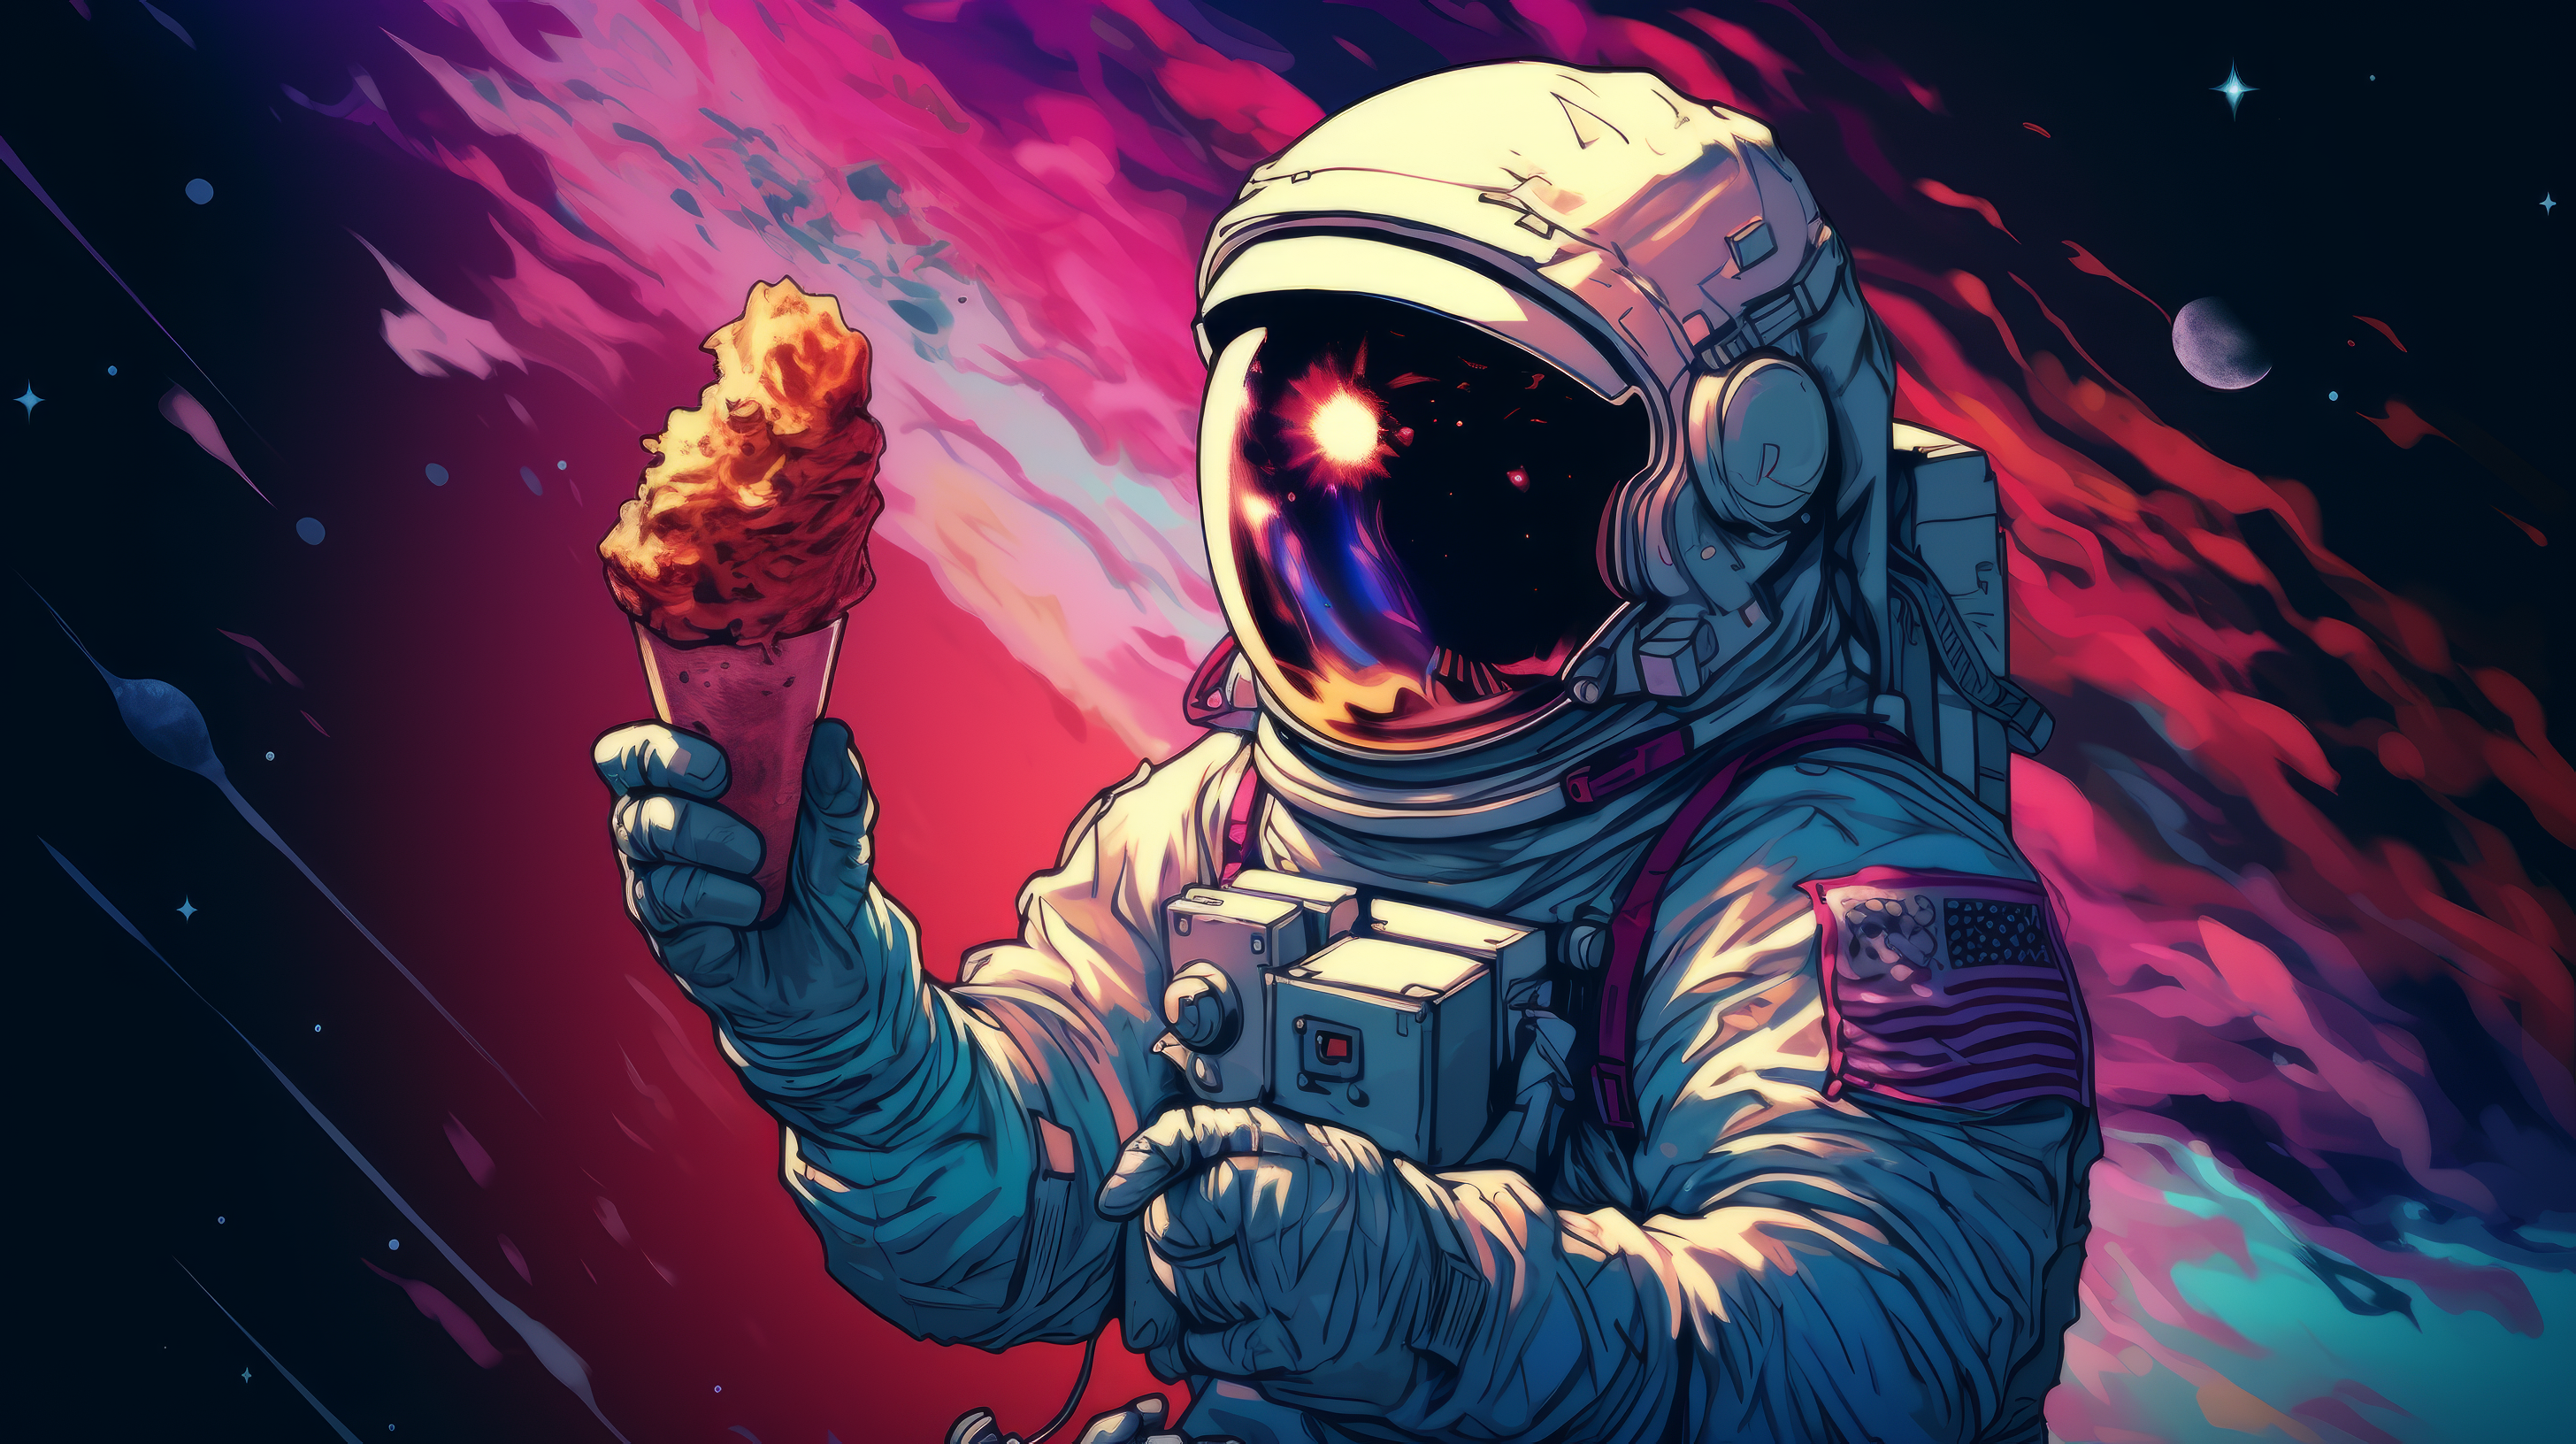 HD Wallpaper of an astronaut holding ice cream in space, created with AI Art, ideal for desktop and background use.